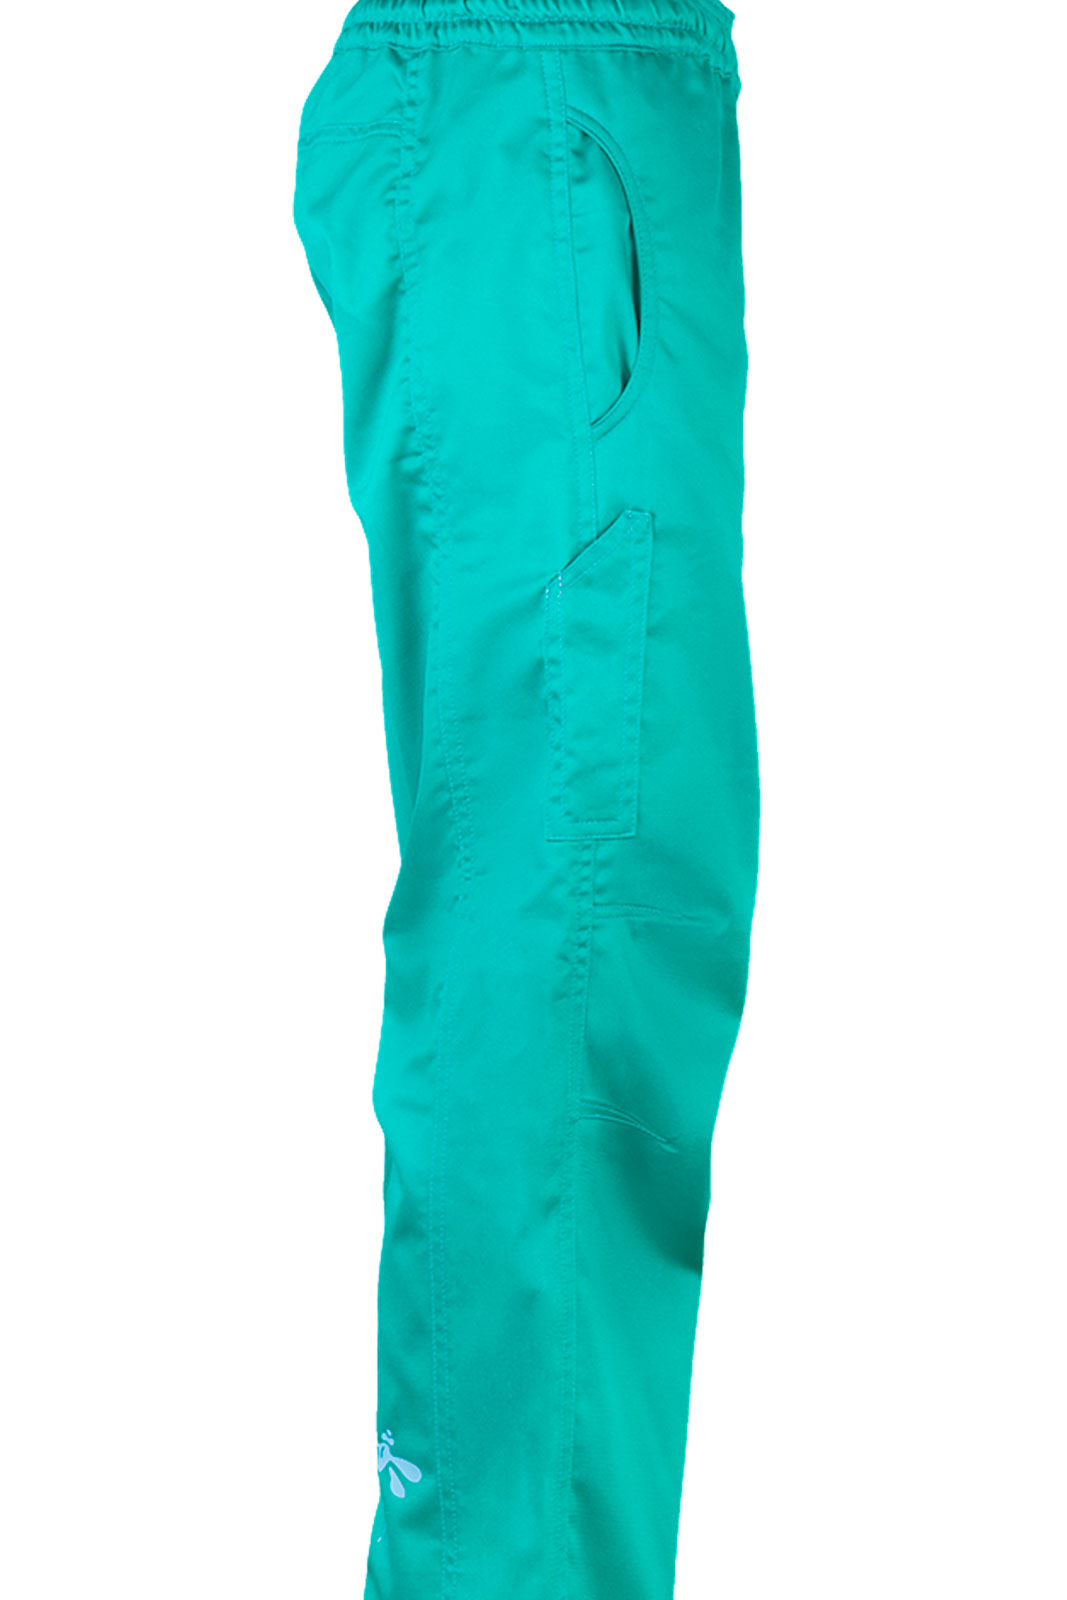 Women's climbing trousers green forest VIOLET MONVIC